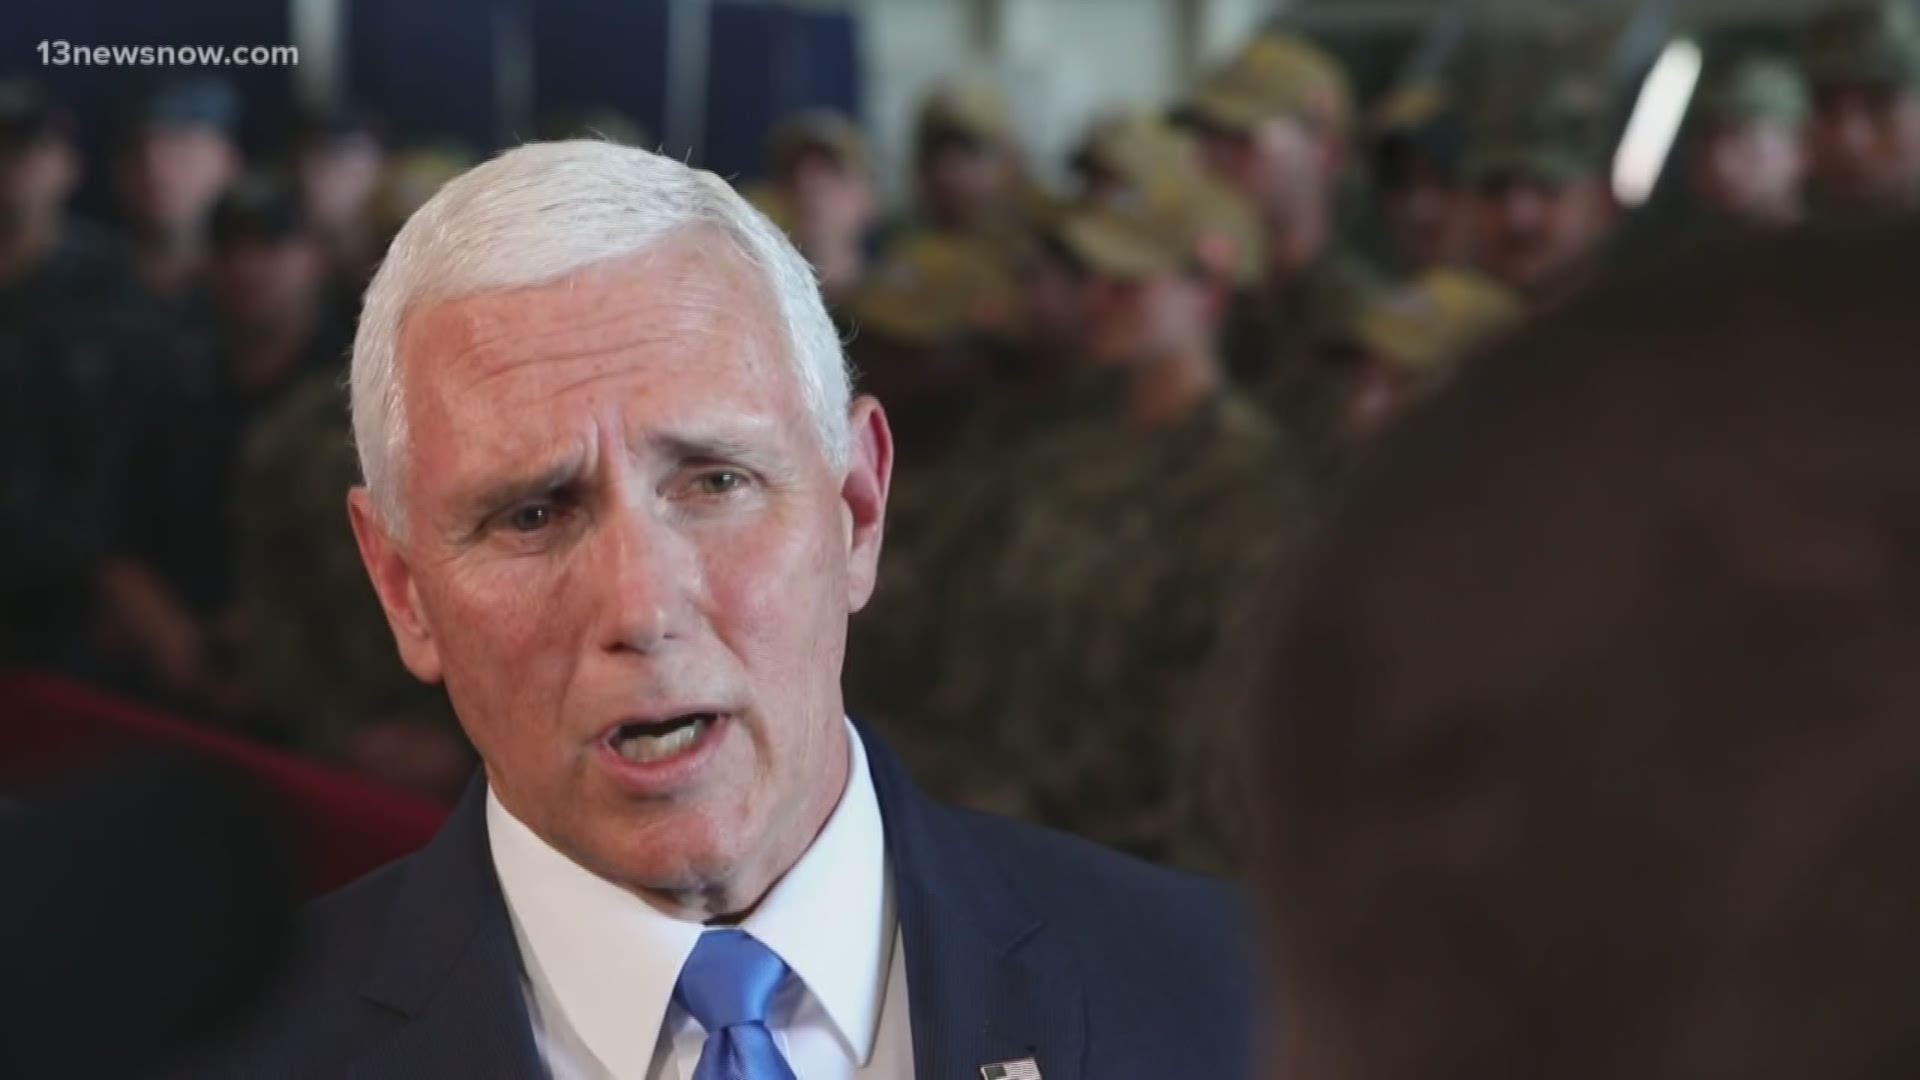 The plan was to repurpose the billions of dollars they would save for other areas of defense funding, but Pence announced Tuesday that the USS Truman  would not be retired early.